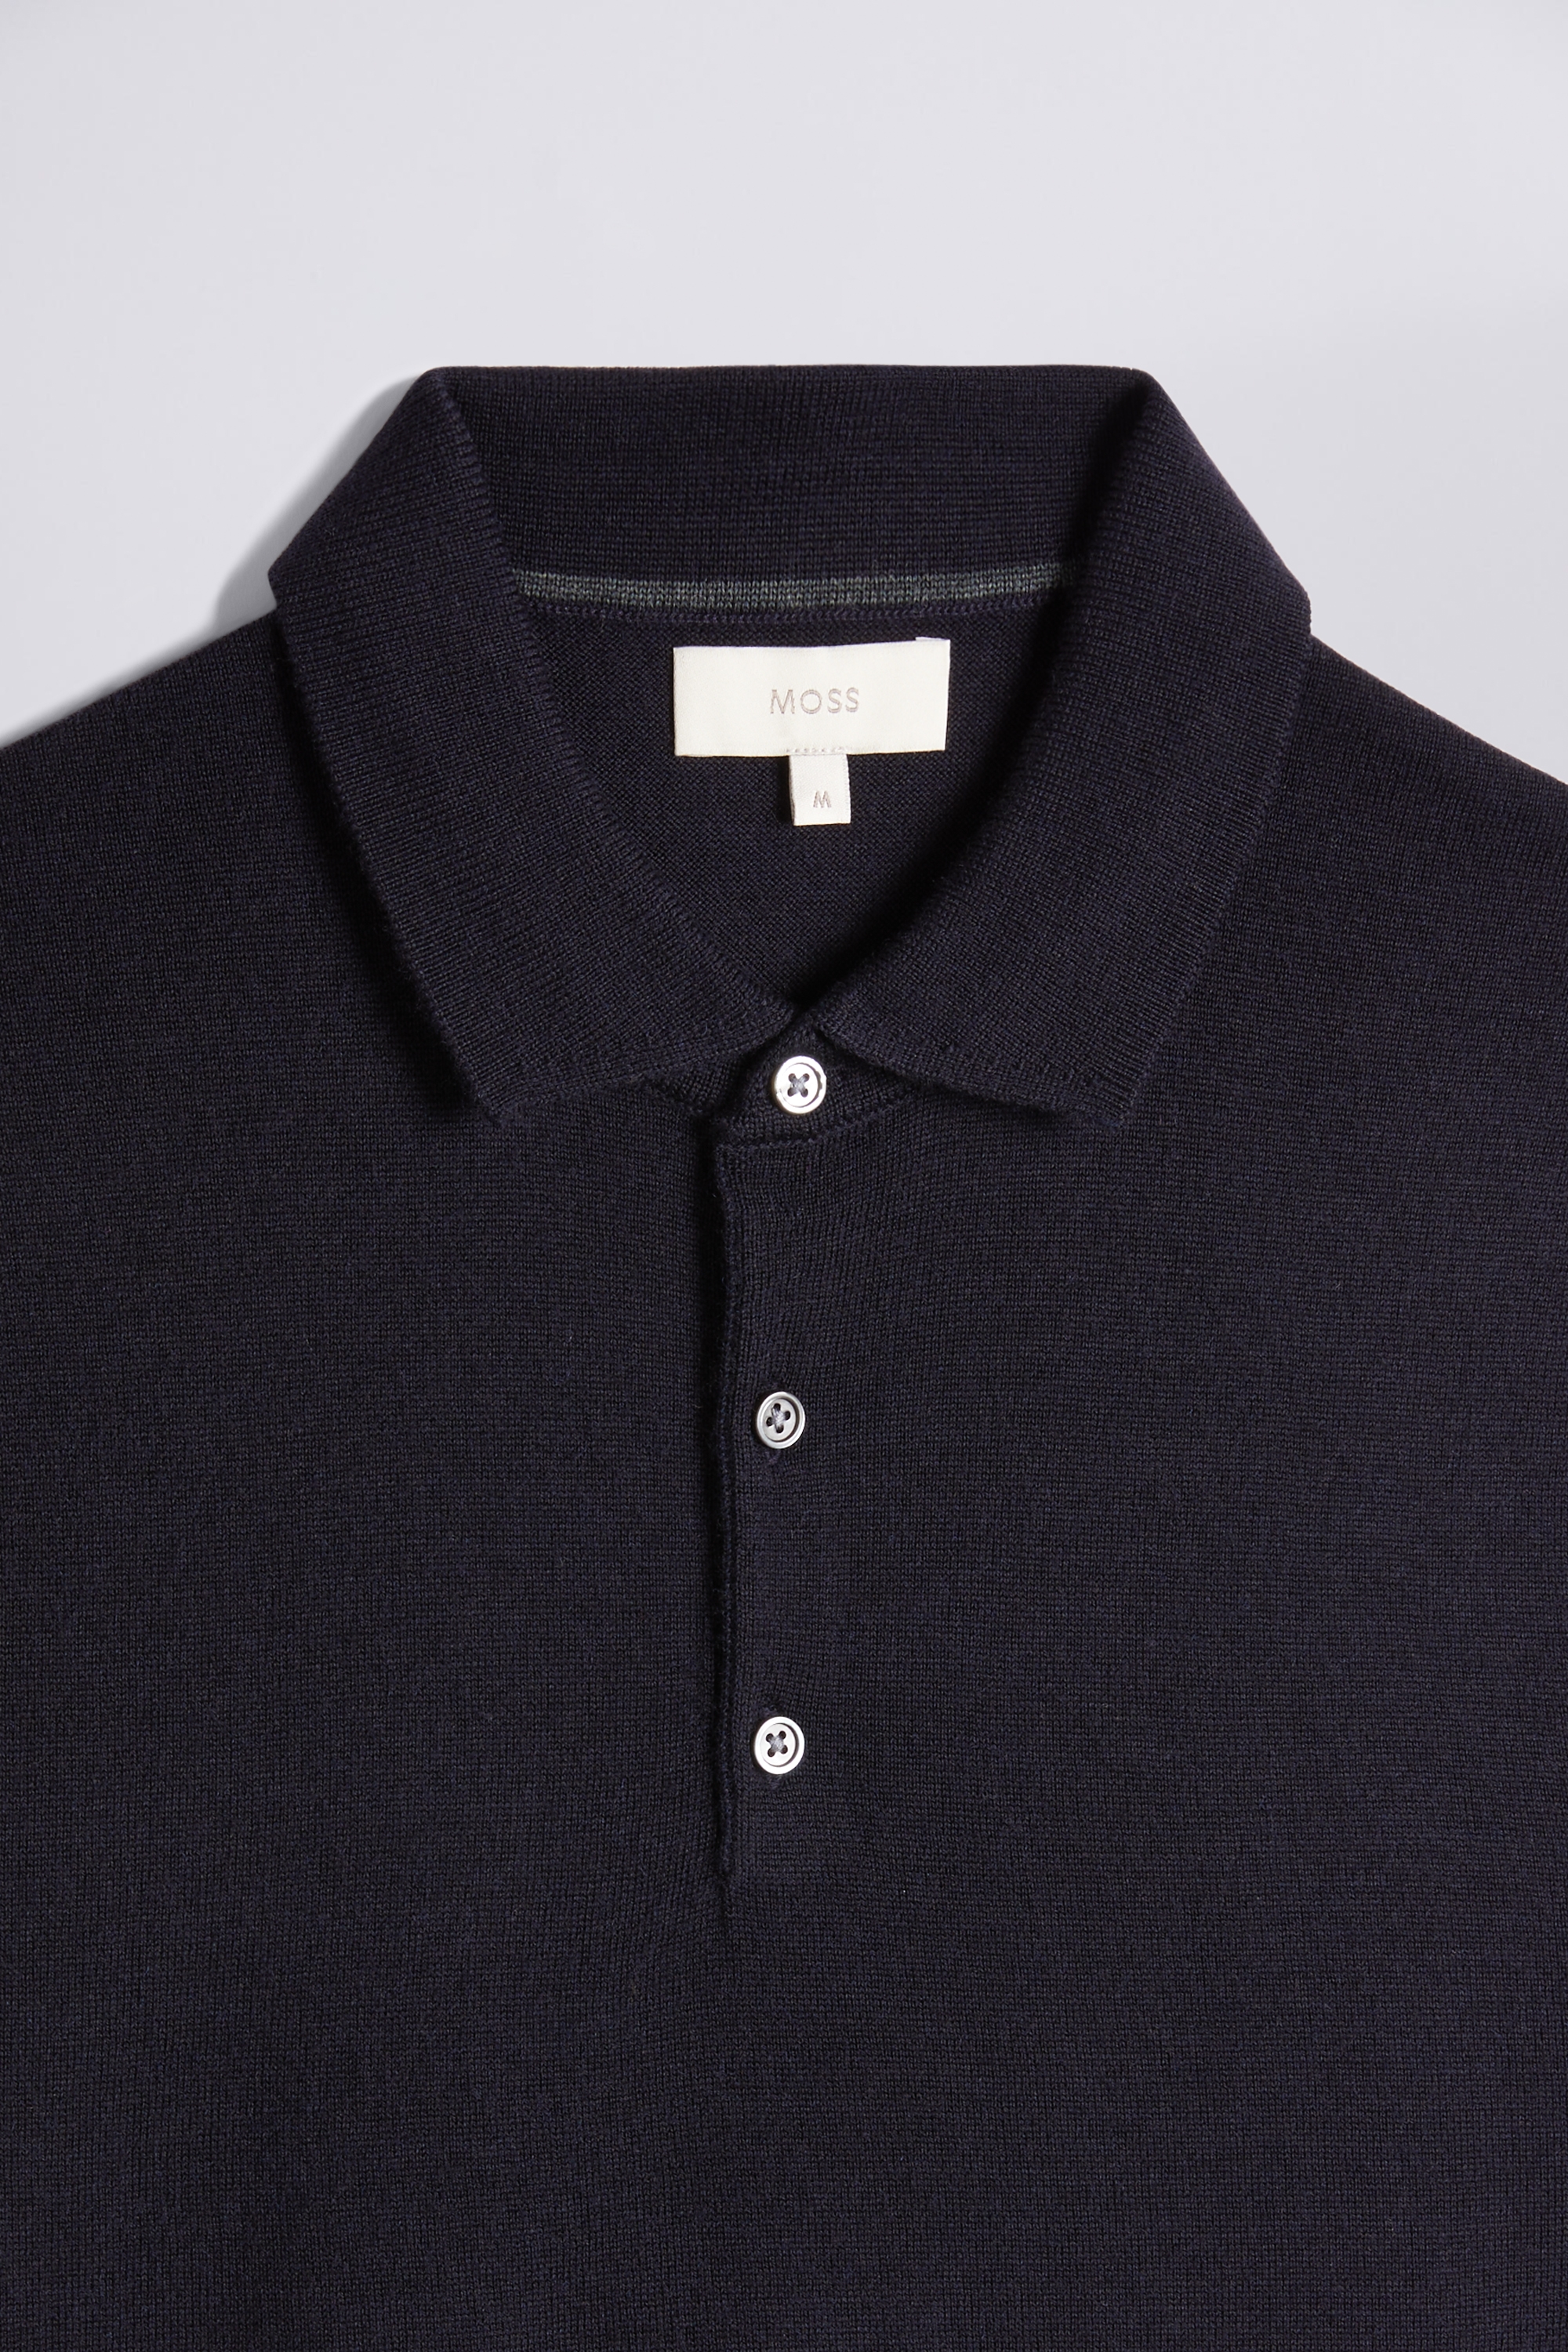 Navy Merino 3 Button Polo Shirt | Buy Online at Moss